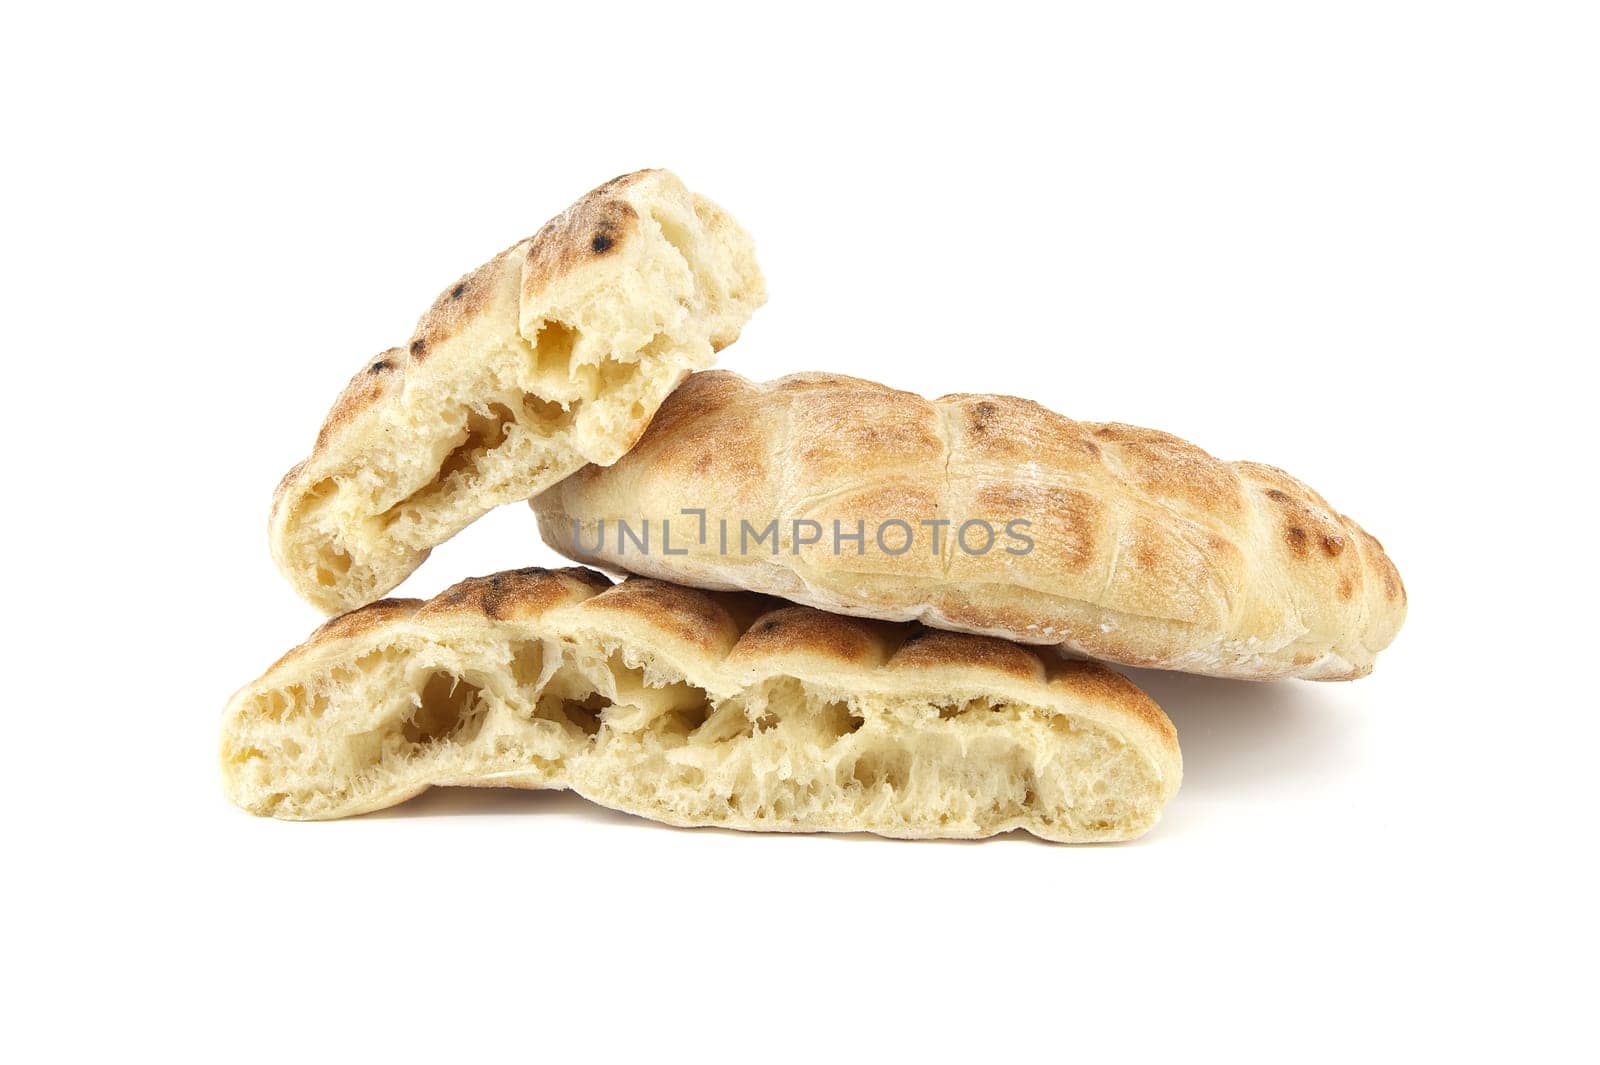 Stack of round pita flat-breads isolated on a white background, pita bread has a pocket and is cut open, showcasing their soft interior